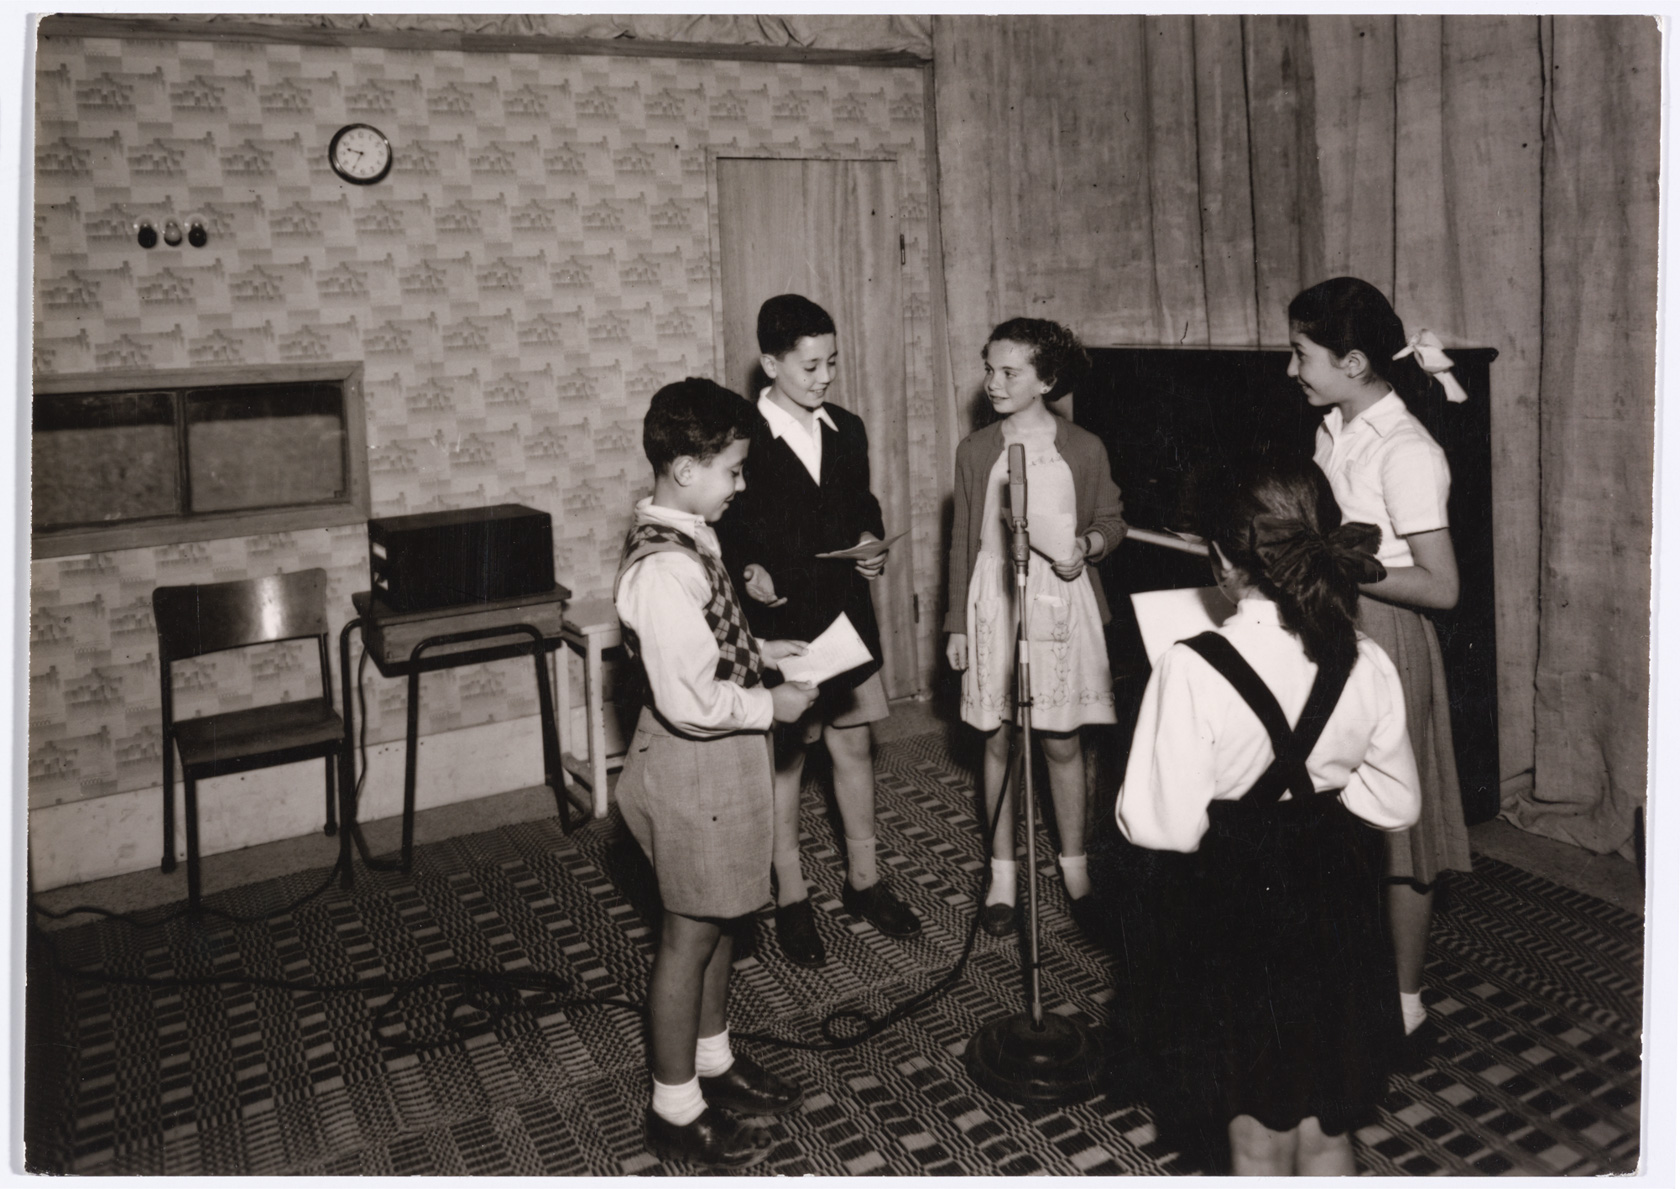 5 children surrounding a microphone smiling